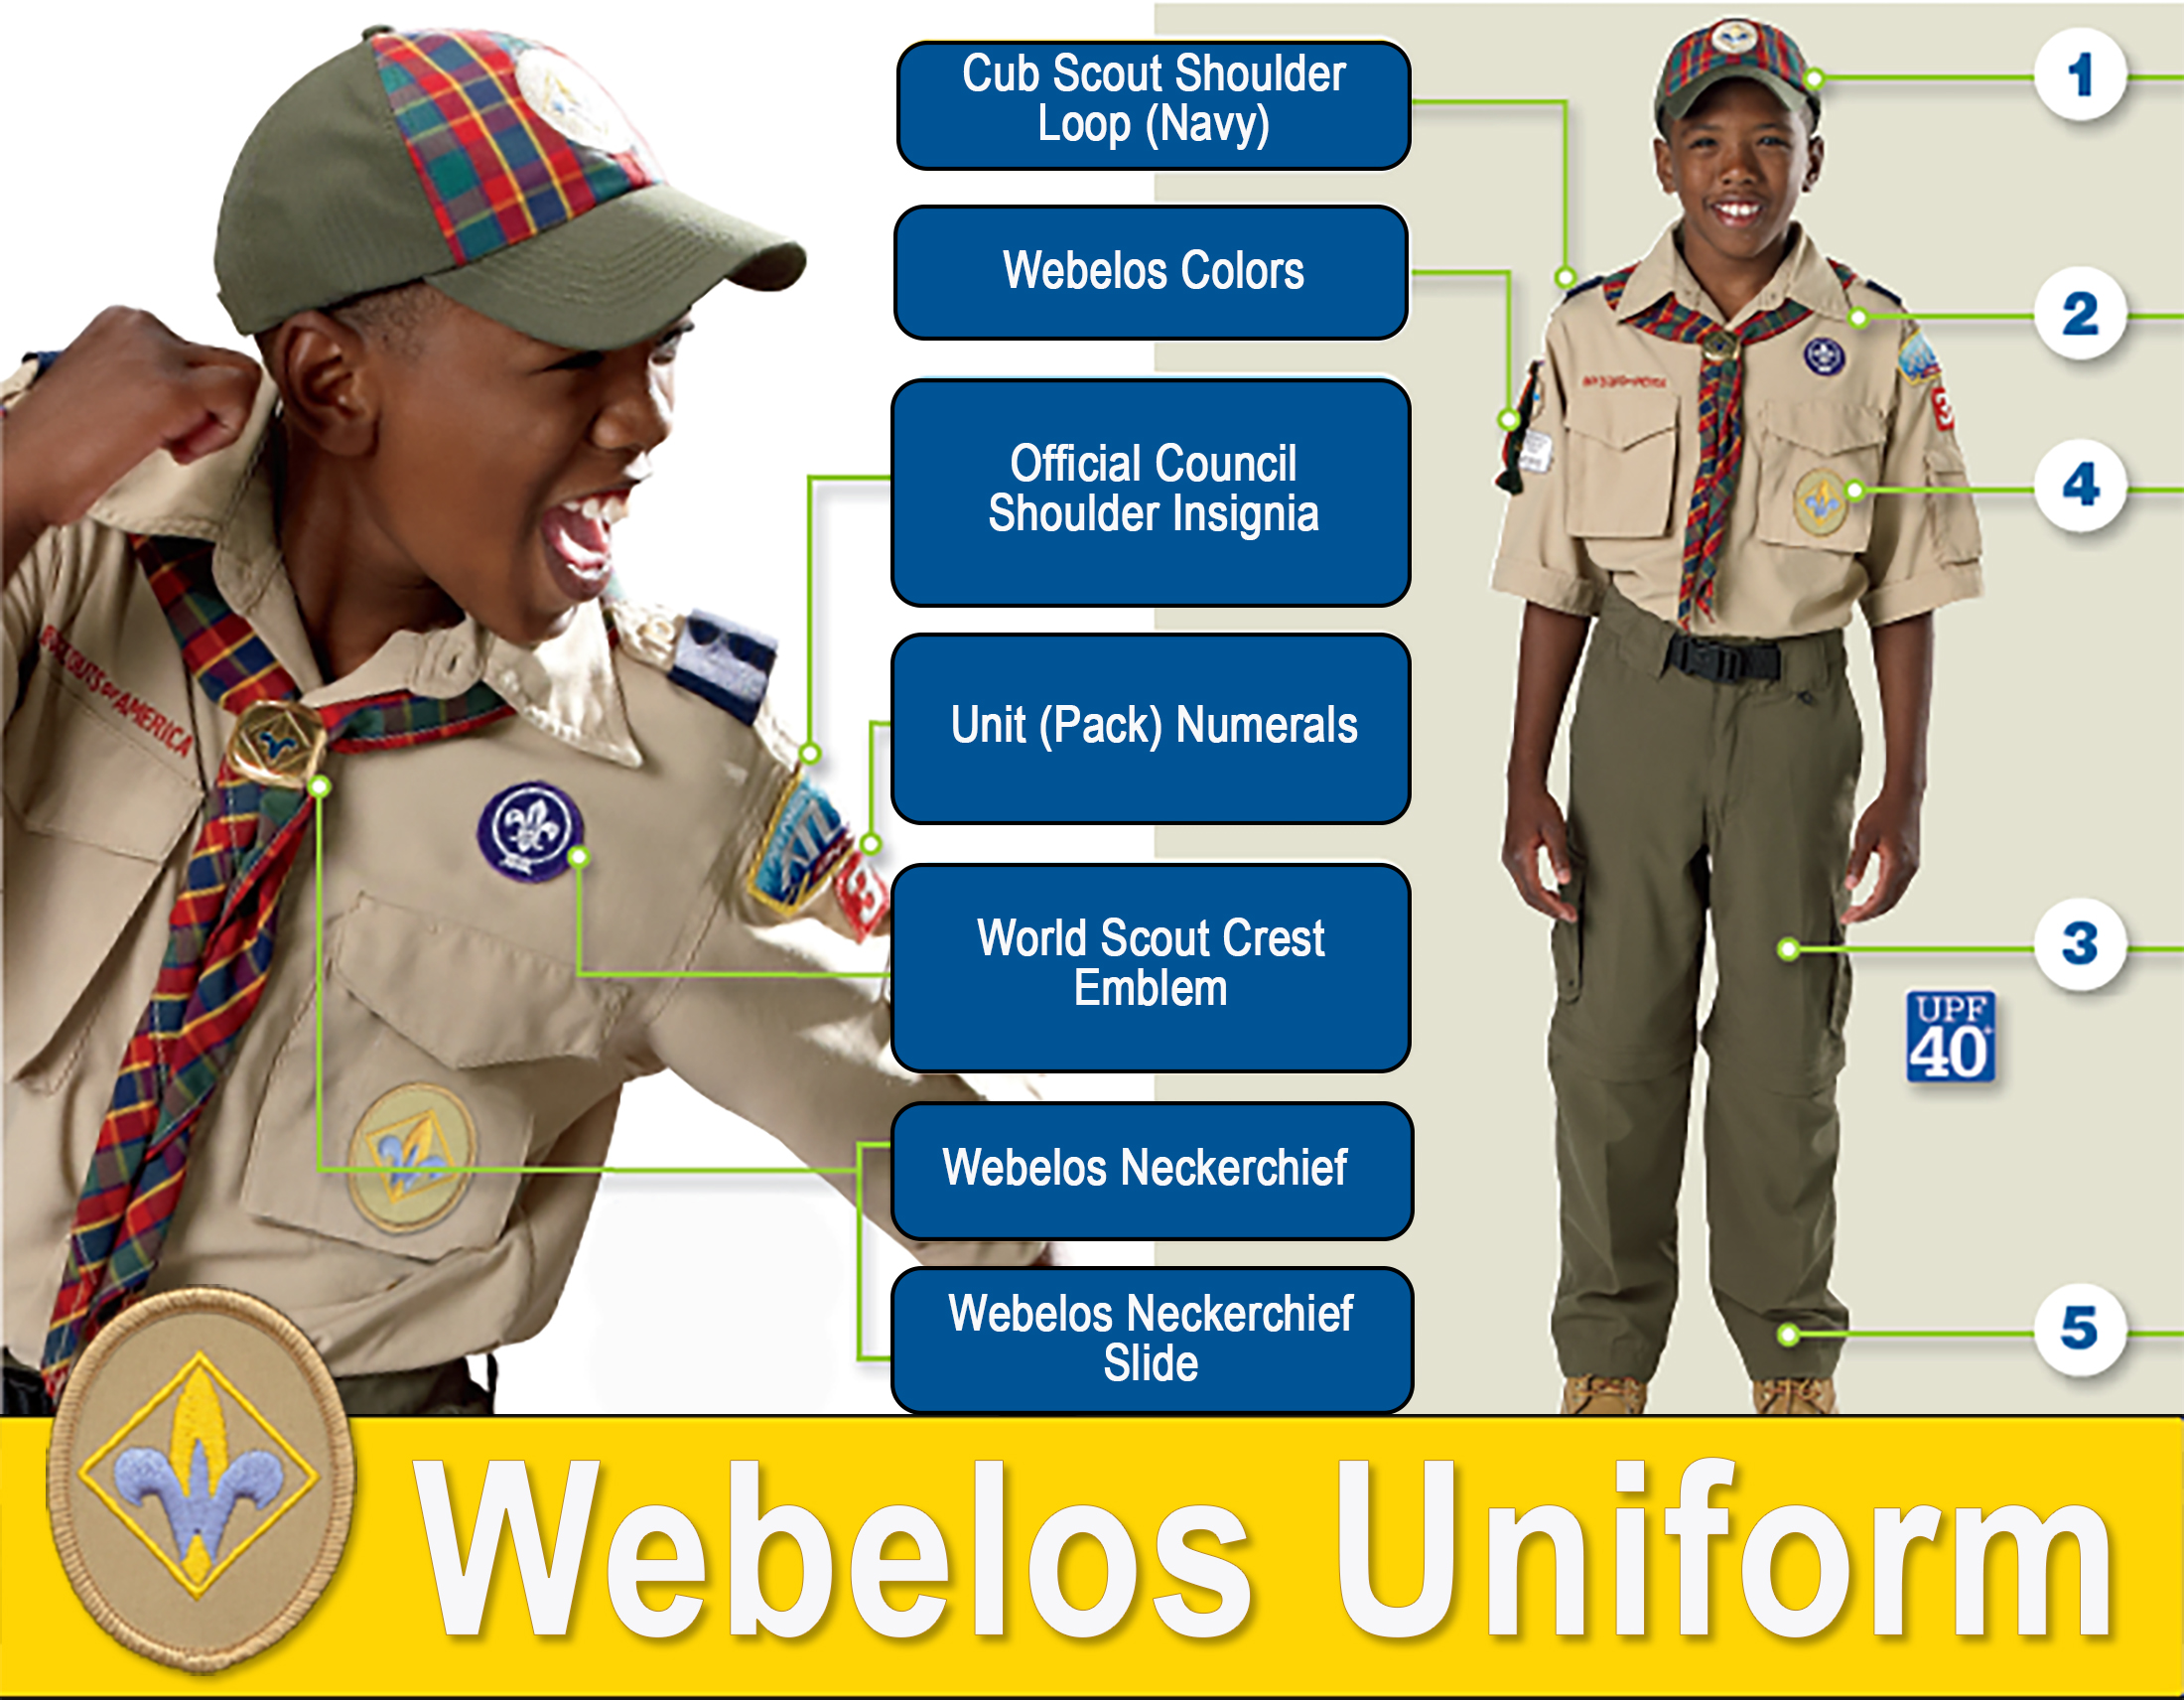 Where To Buy Cub Scout Uniform 96